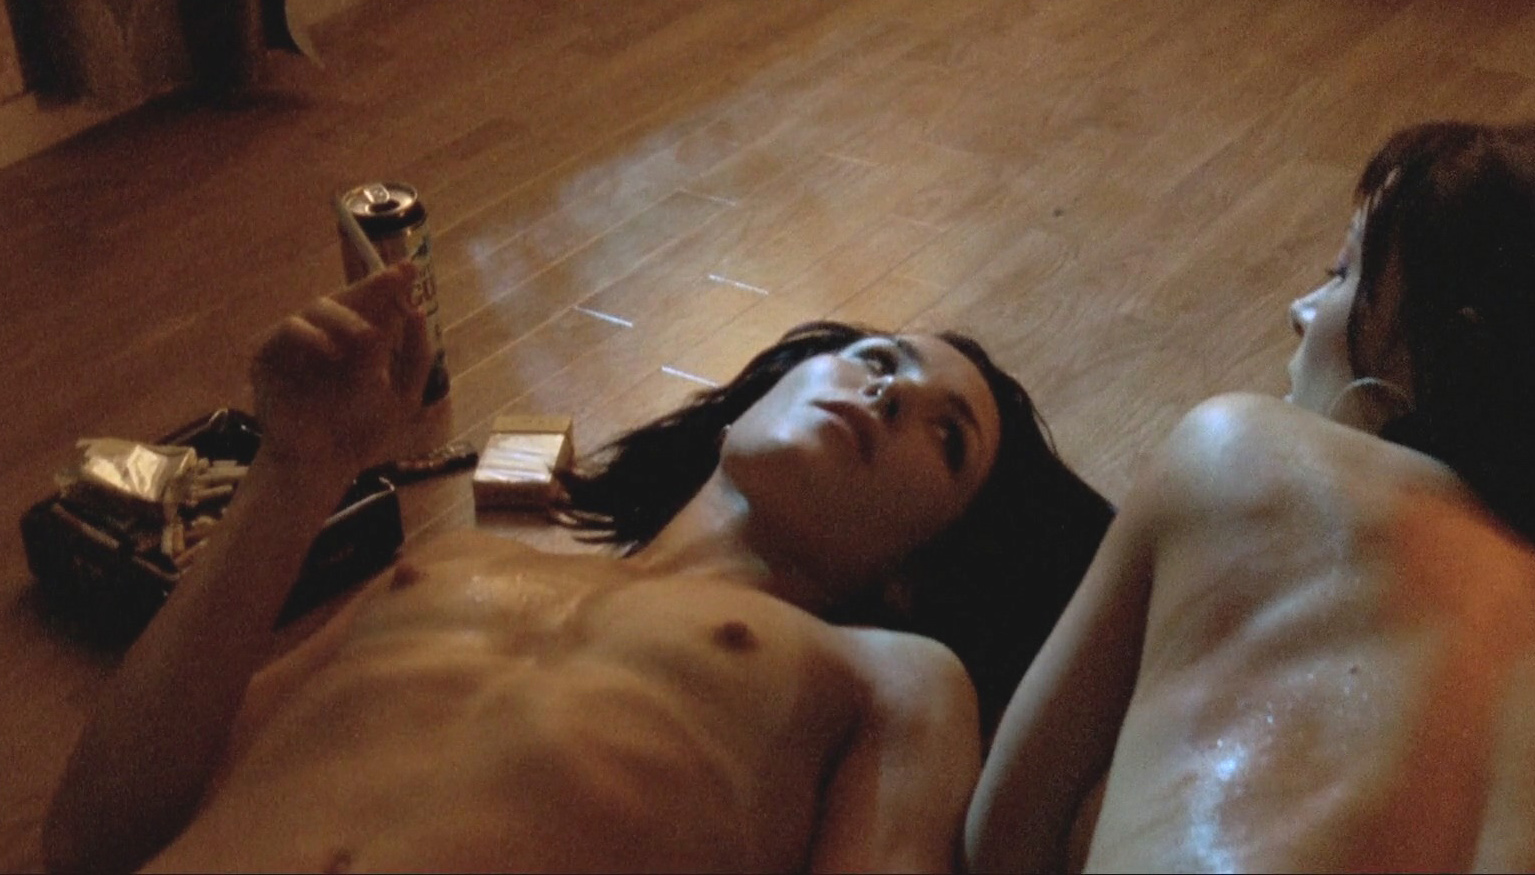 Noomi Rapace topless with her sexy boobs nude smoking on the floor.